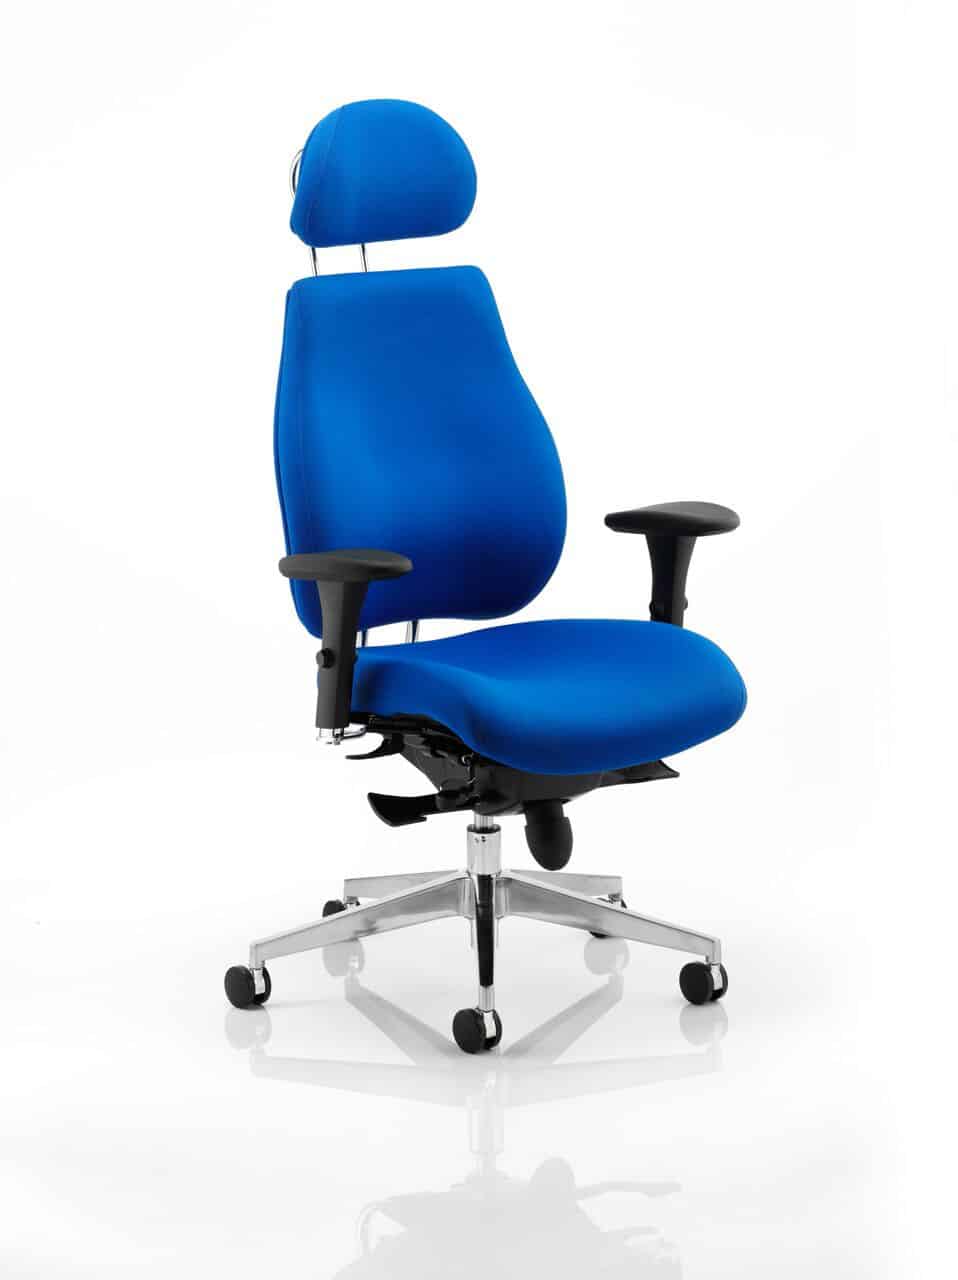 An ergonomic desk chair from Pure Office Solutions